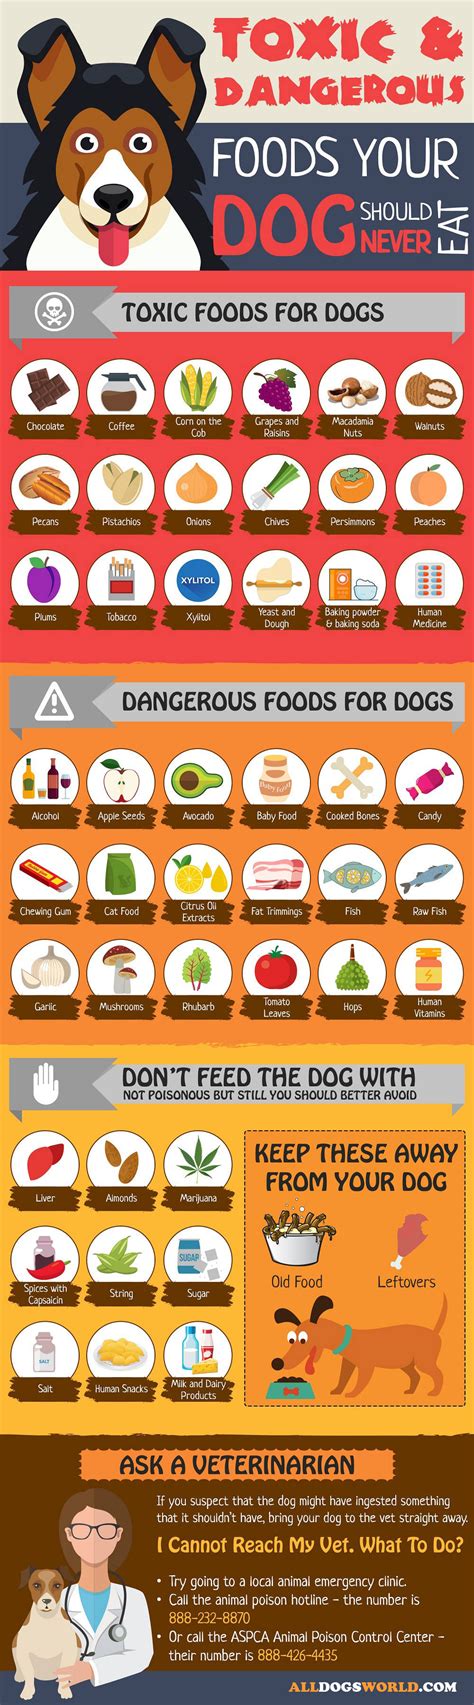 What meat is toxic to dogs?